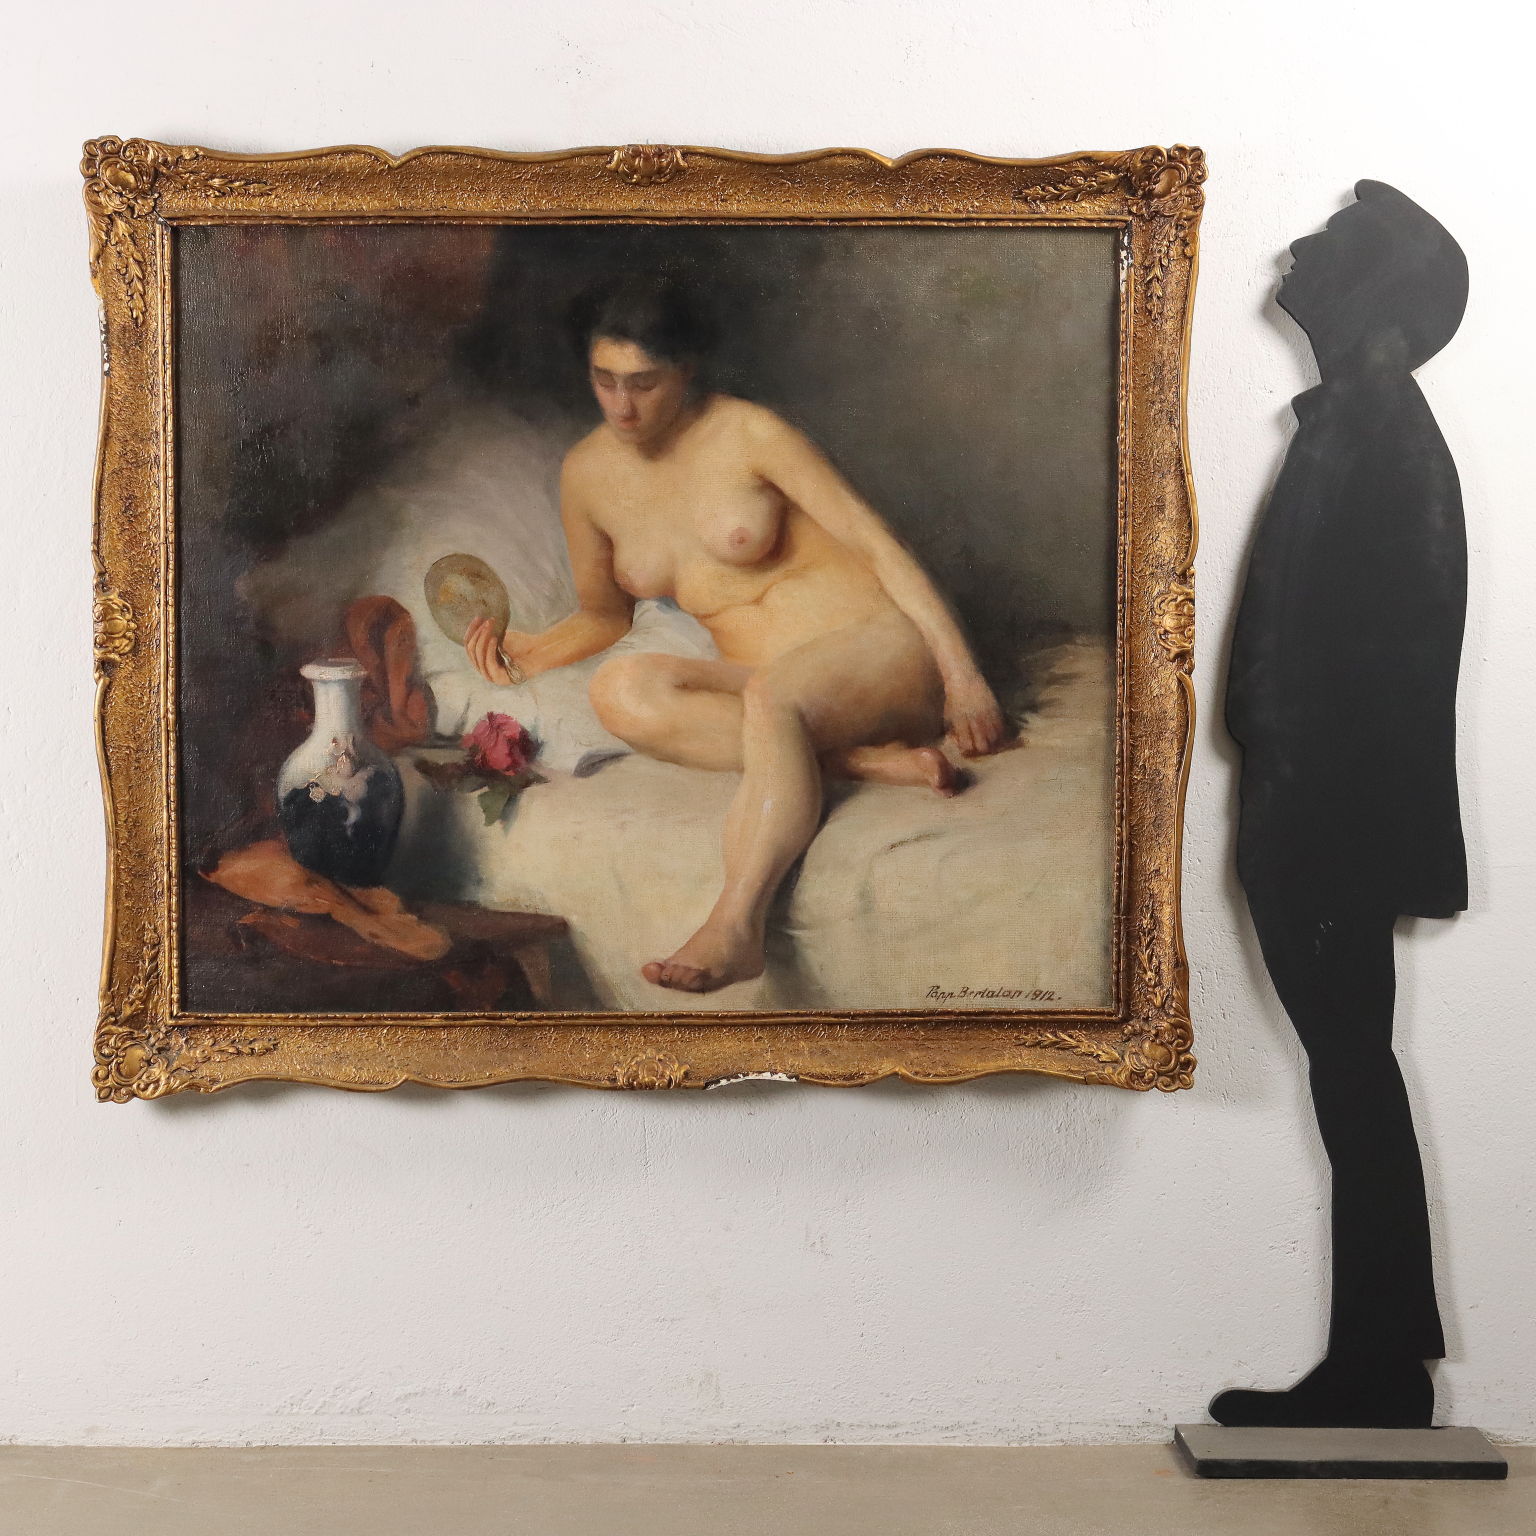 Modern Painting by Papp Bertalan Oil on Canvas Female Nude 1912